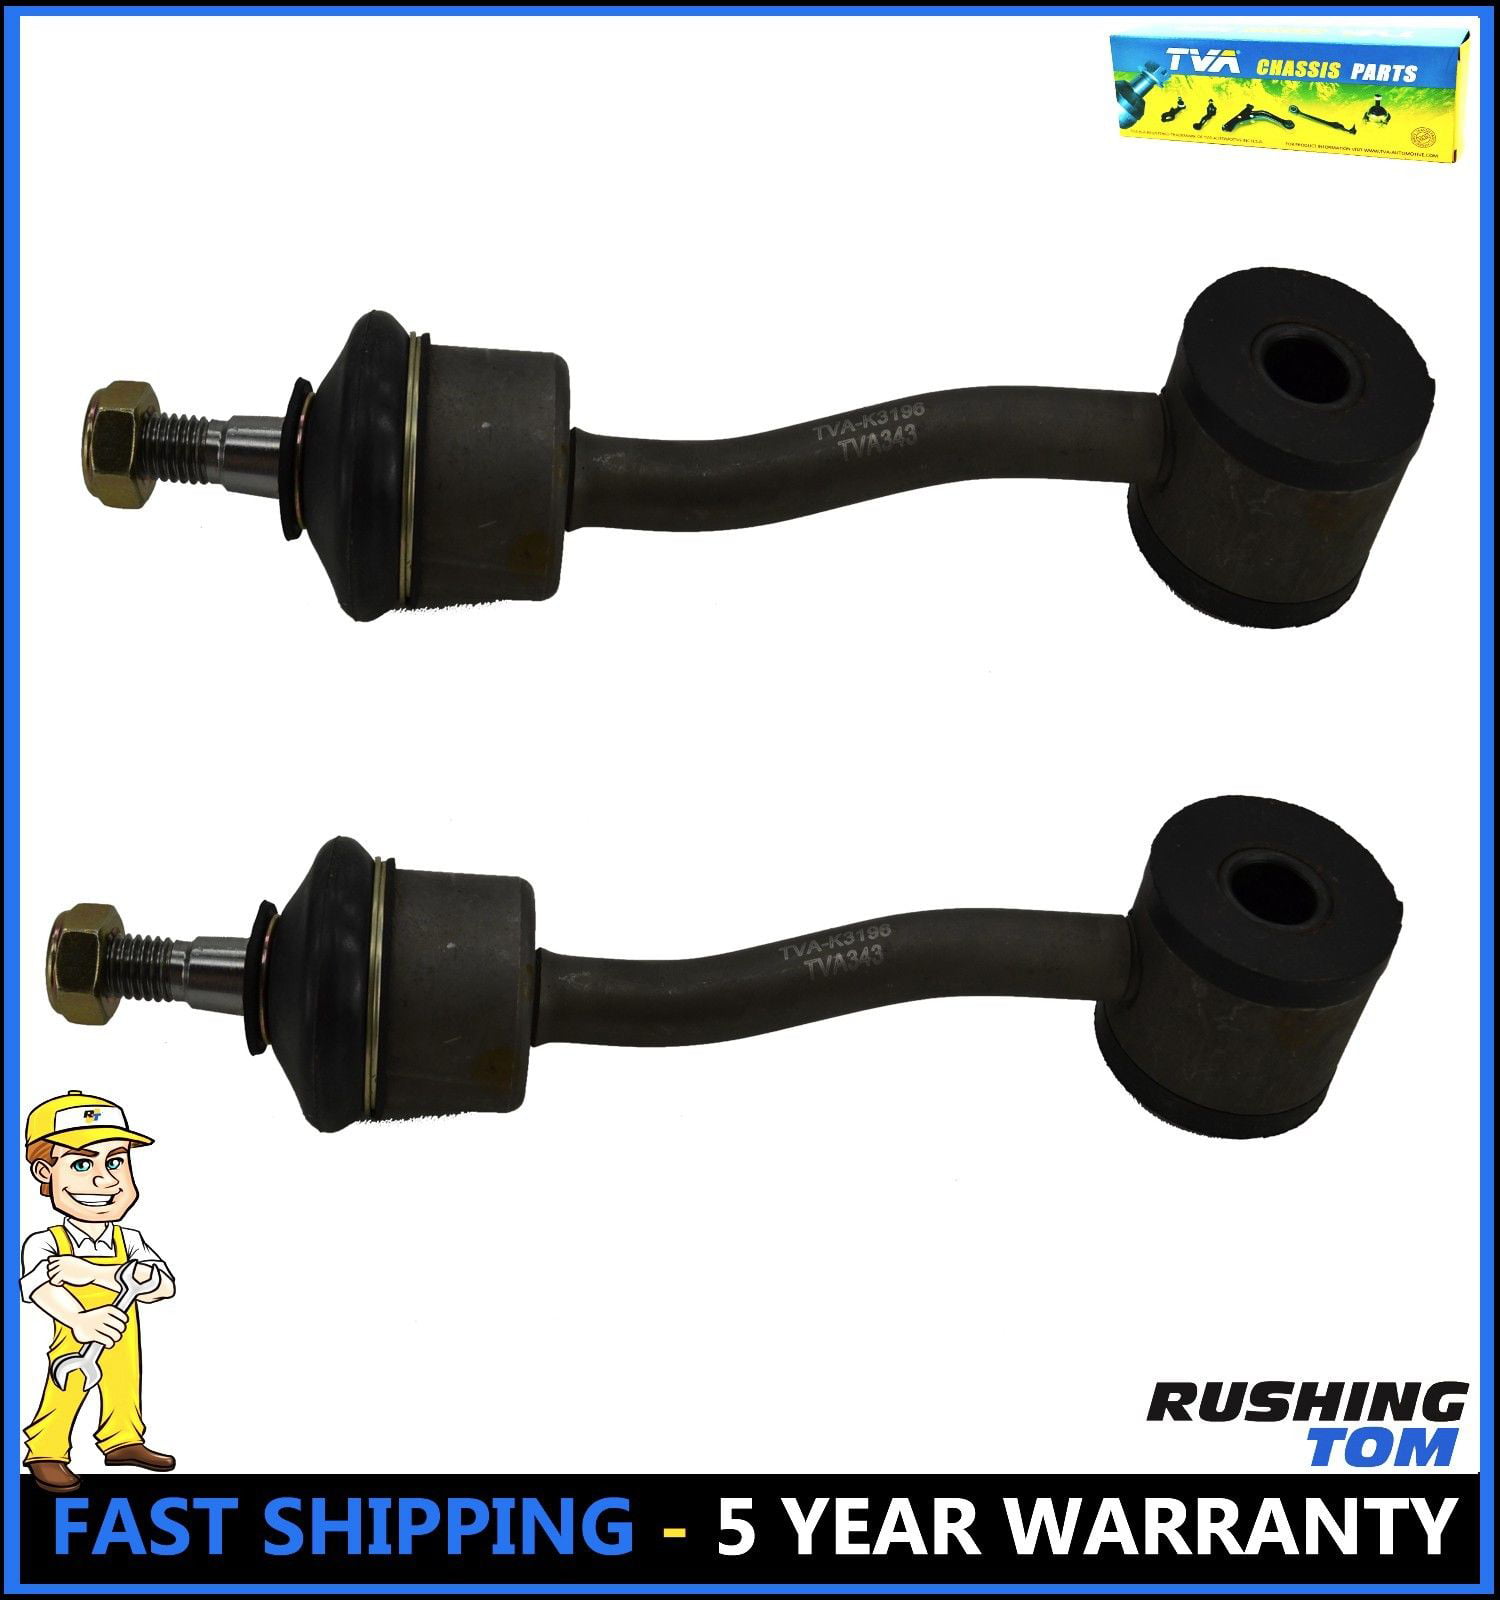 2 Pc New Suspension Kit for Grand Cherokee Front Sway Bar End Link 3 Yr Warranty